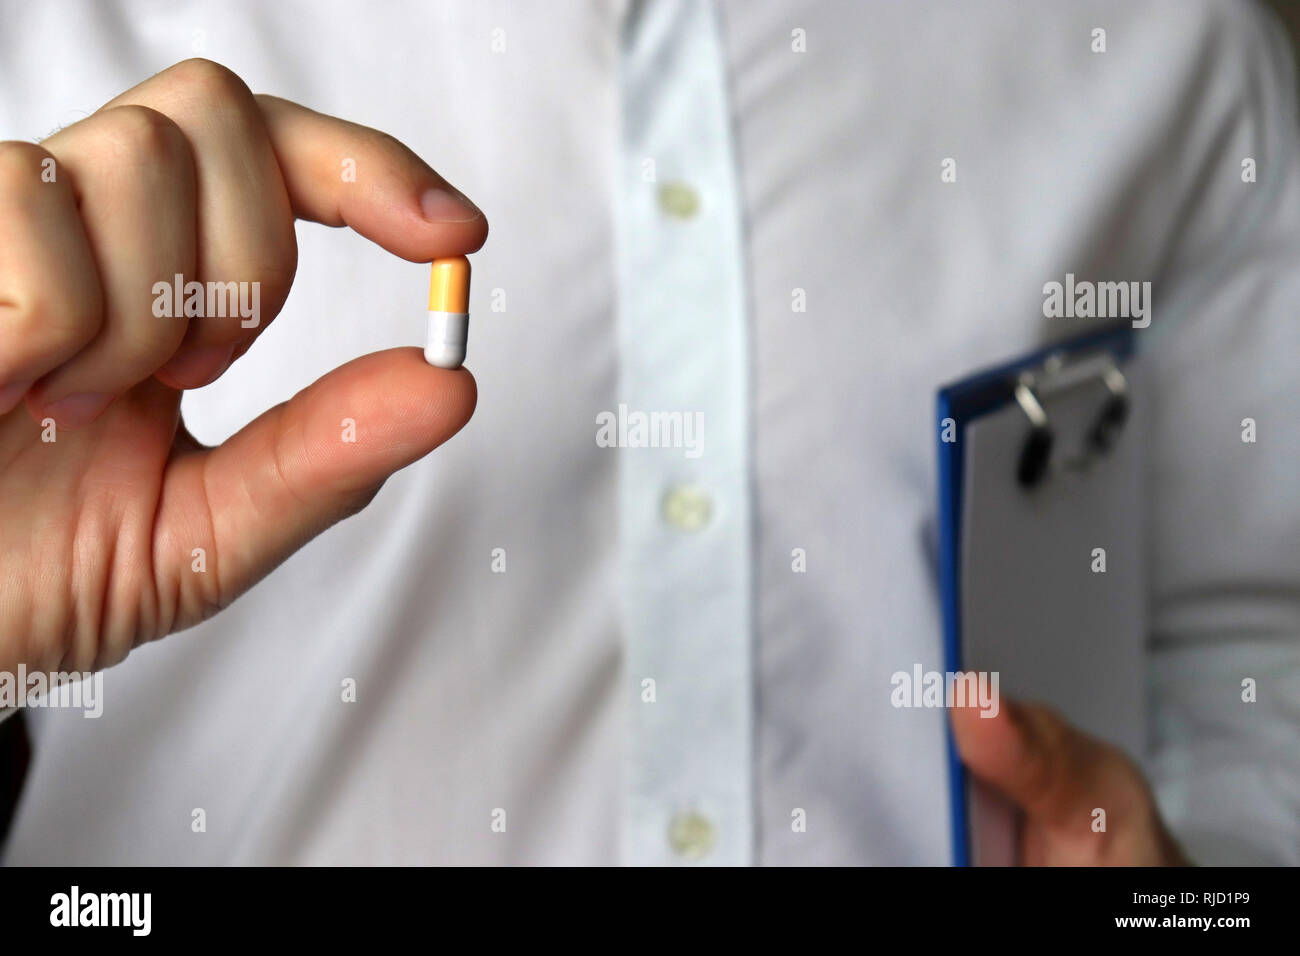 Doctor with pill, man holding capsule. Concept of medications, vitamins, cold and flu treatment, pharmacy Stock Photo